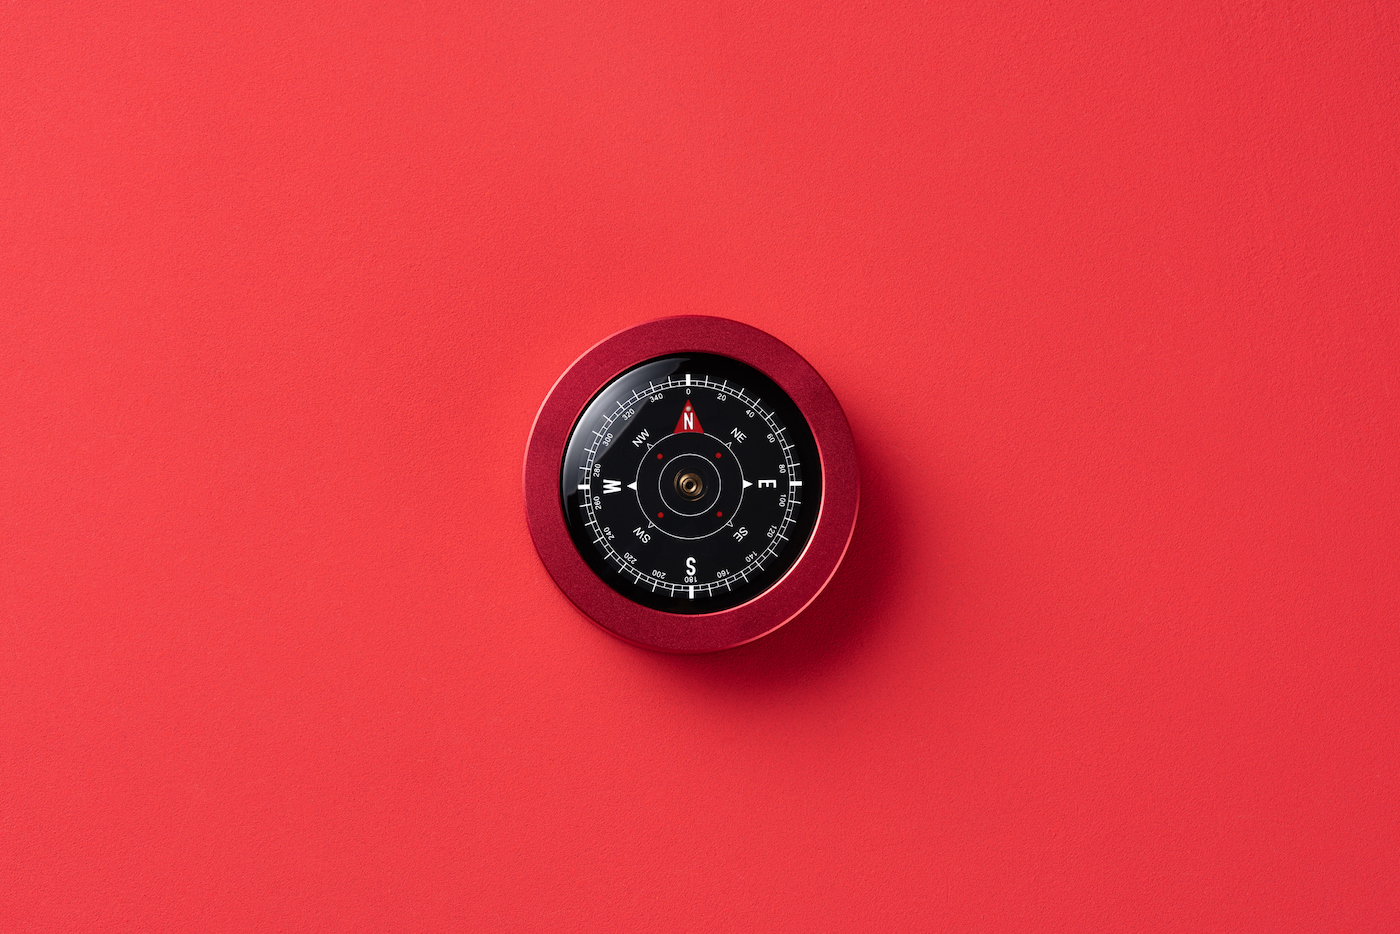 A red colored navigational compass on a red background directly above the sight.